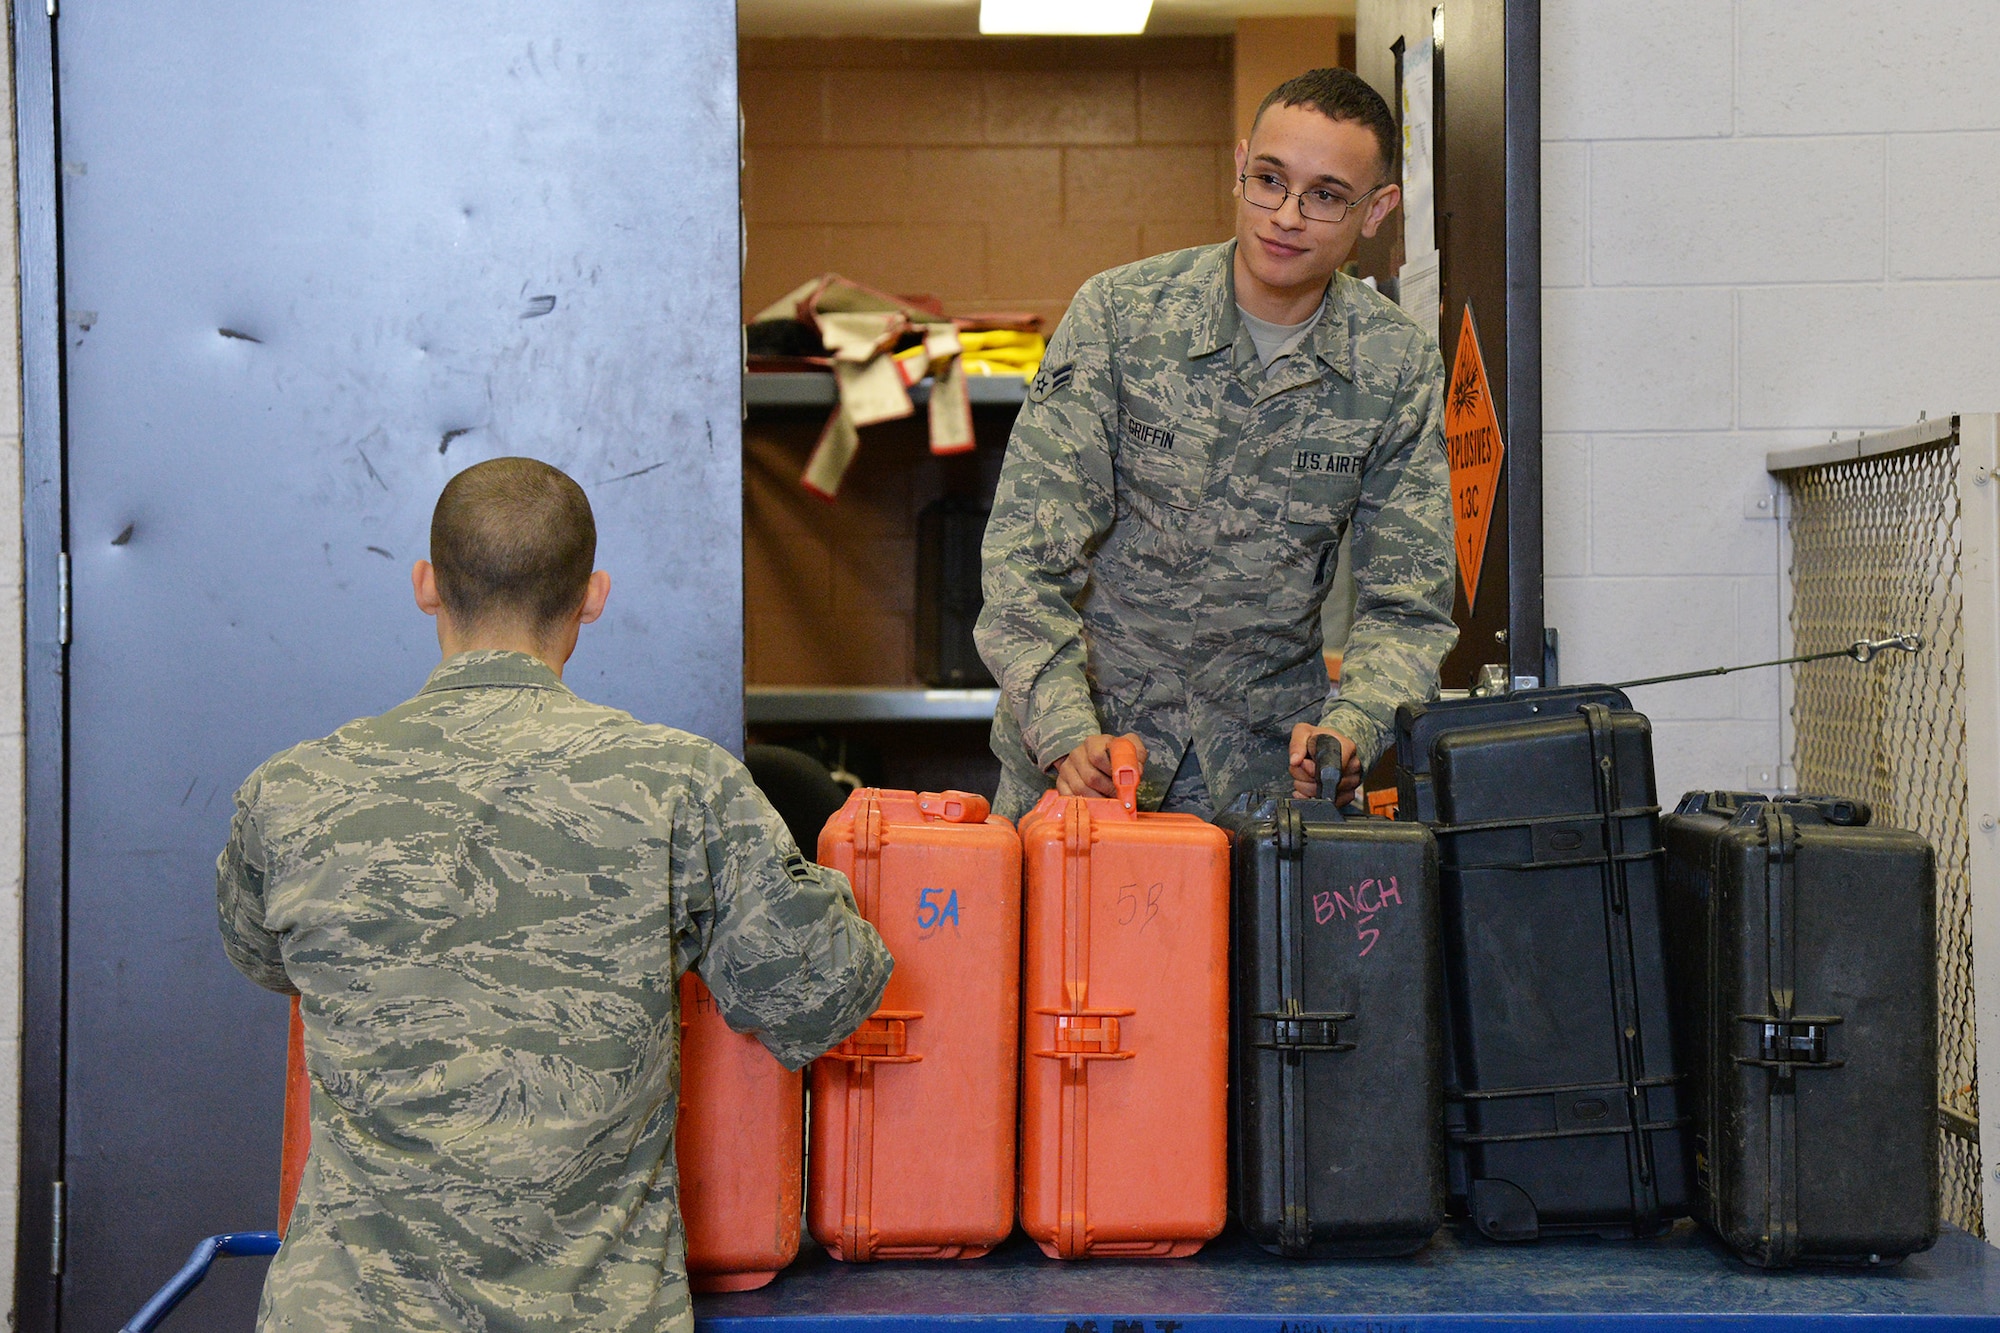 Airmen 1st Class Joseph Griffin, right, and Josiah Remy, 341st Missile Maintenance Squadron maintenance technicians, prepare to load tool kits into a maintenance van Jan. 18, 2017, at Malmstrom Air Force Base, Mont. Tools in each kit range from wrenches, hammers, pry bars and screw drivers to tape, lanyard material, dust caps and bolts. (U.S. Air Force photo/Airman 1st Class Daniel Brosam)